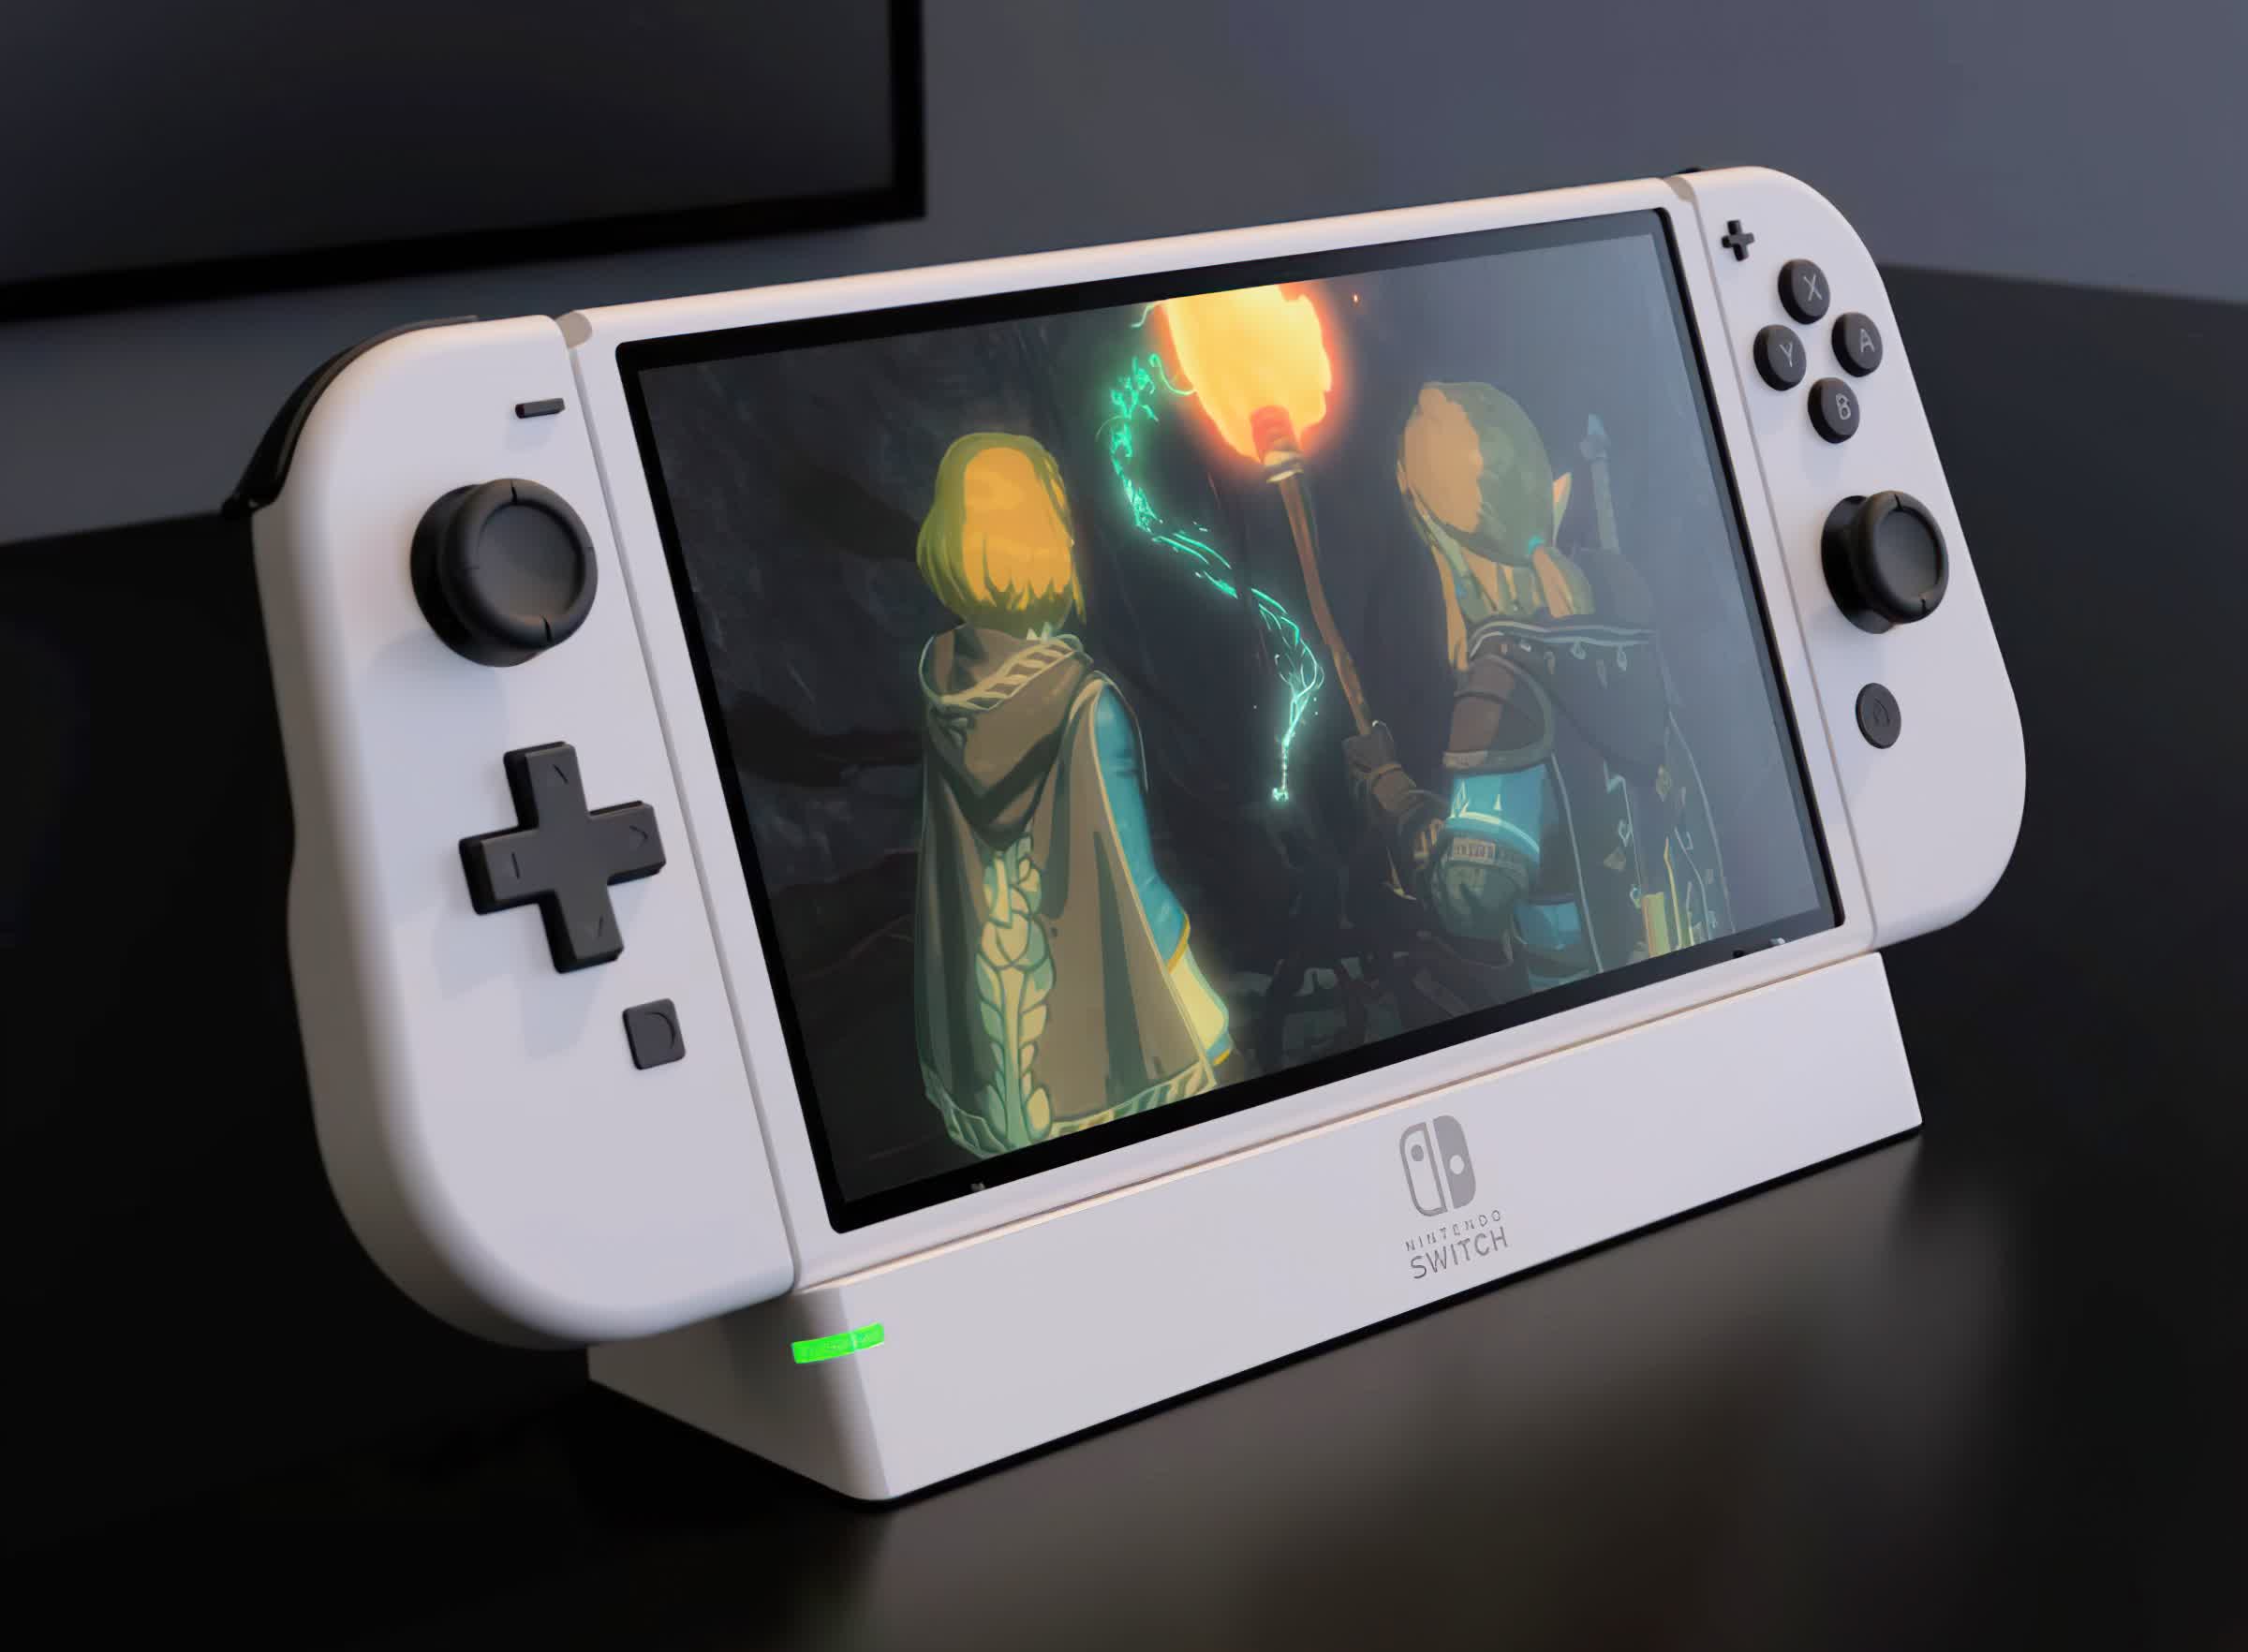 Nintendo has 'no plans' to launch a 4K Switch, despite rumors to the contrary